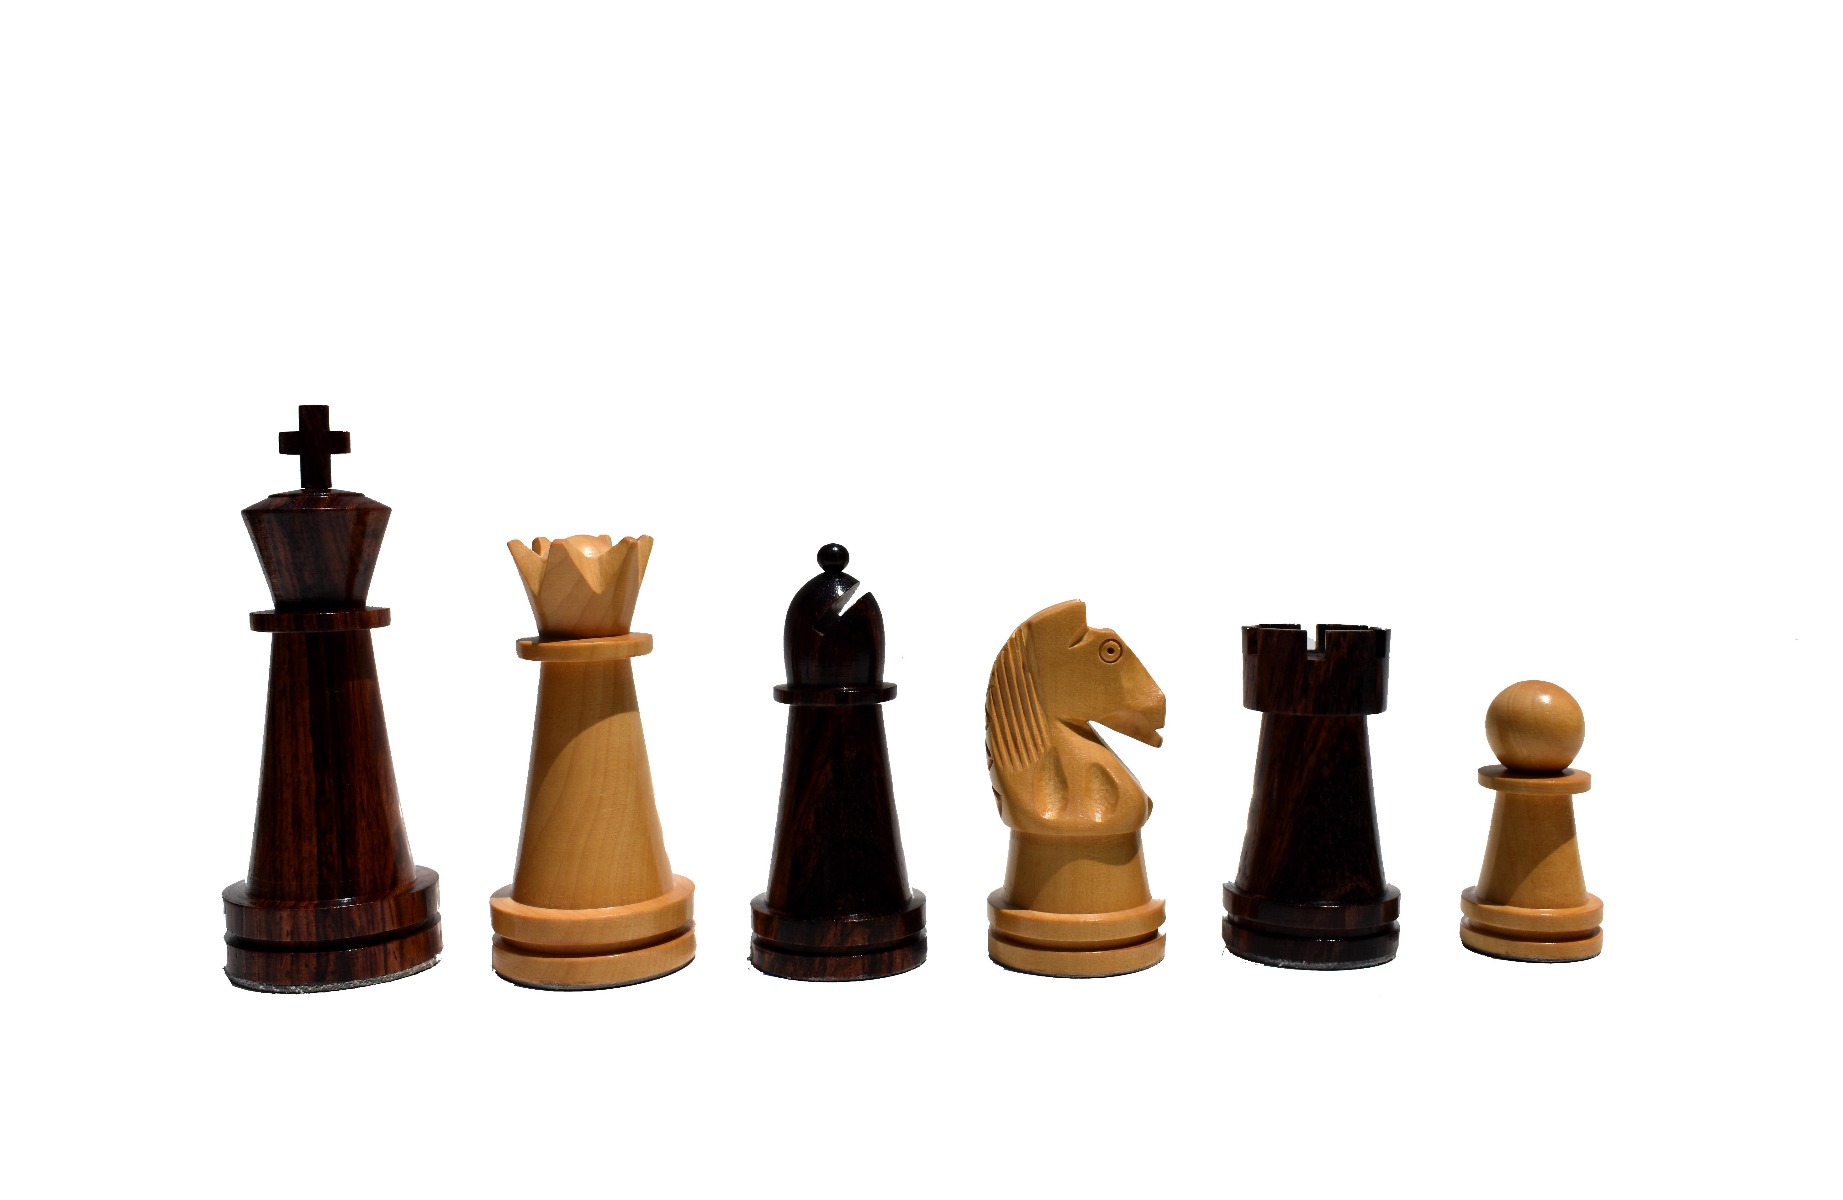 The Magnificent - Gold/Silver-Plated Brass Wood Chess Pieces - Chess Pieces Only - Fancy Chess